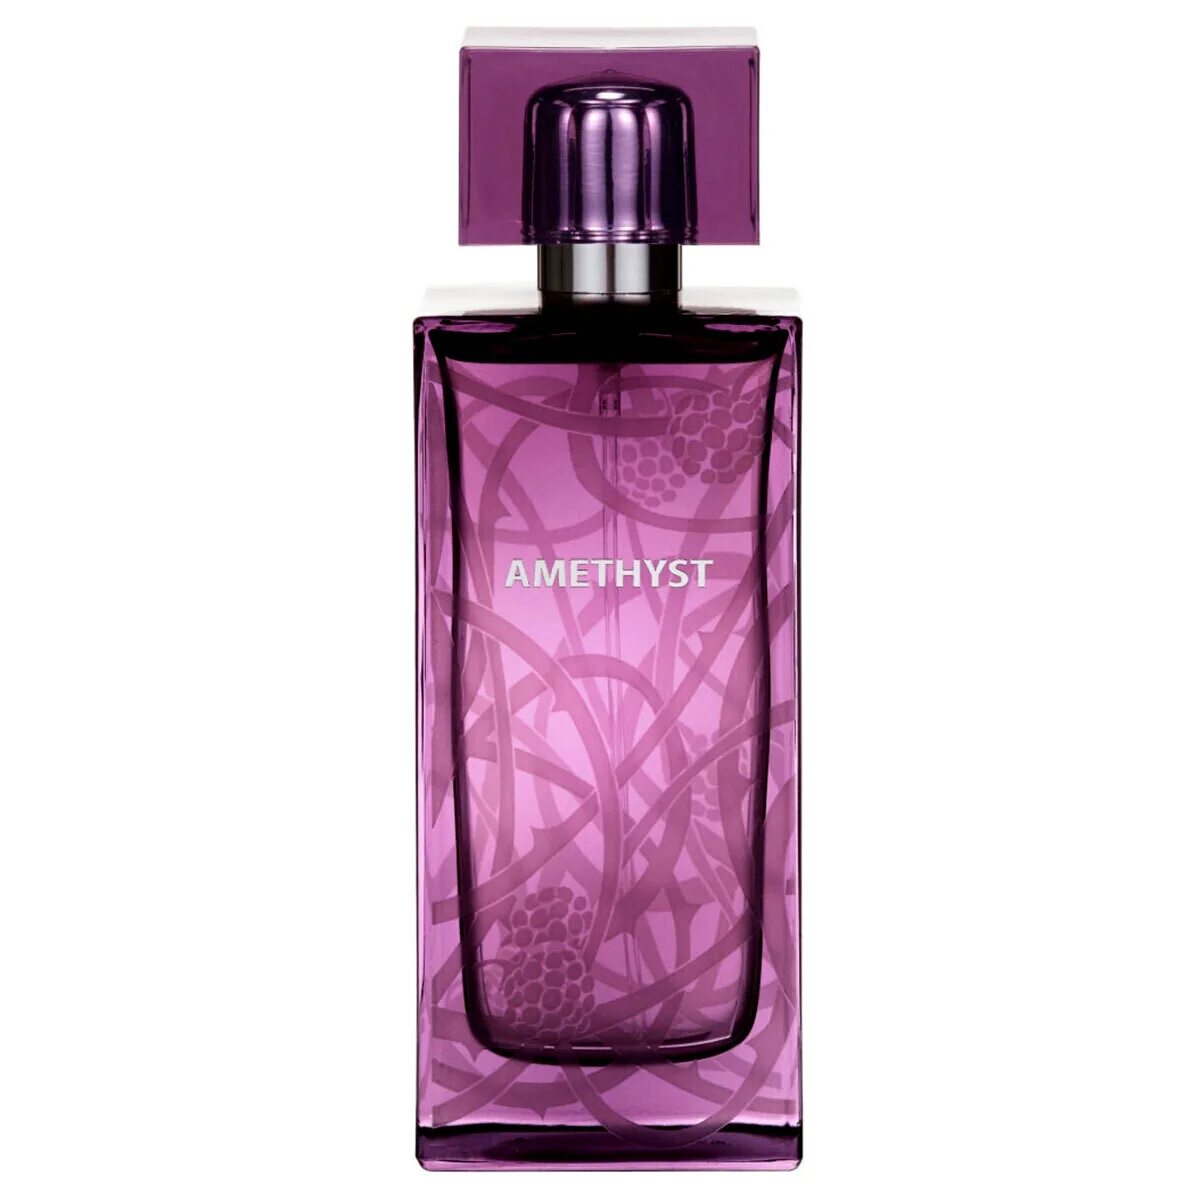 Лалик аметист 50 мл. Lalique Amethyst exquise woman EDP 100 ml Tester. Lalique Amethyst EDP L 100ml. Lalique Amethyst (w) EDP.